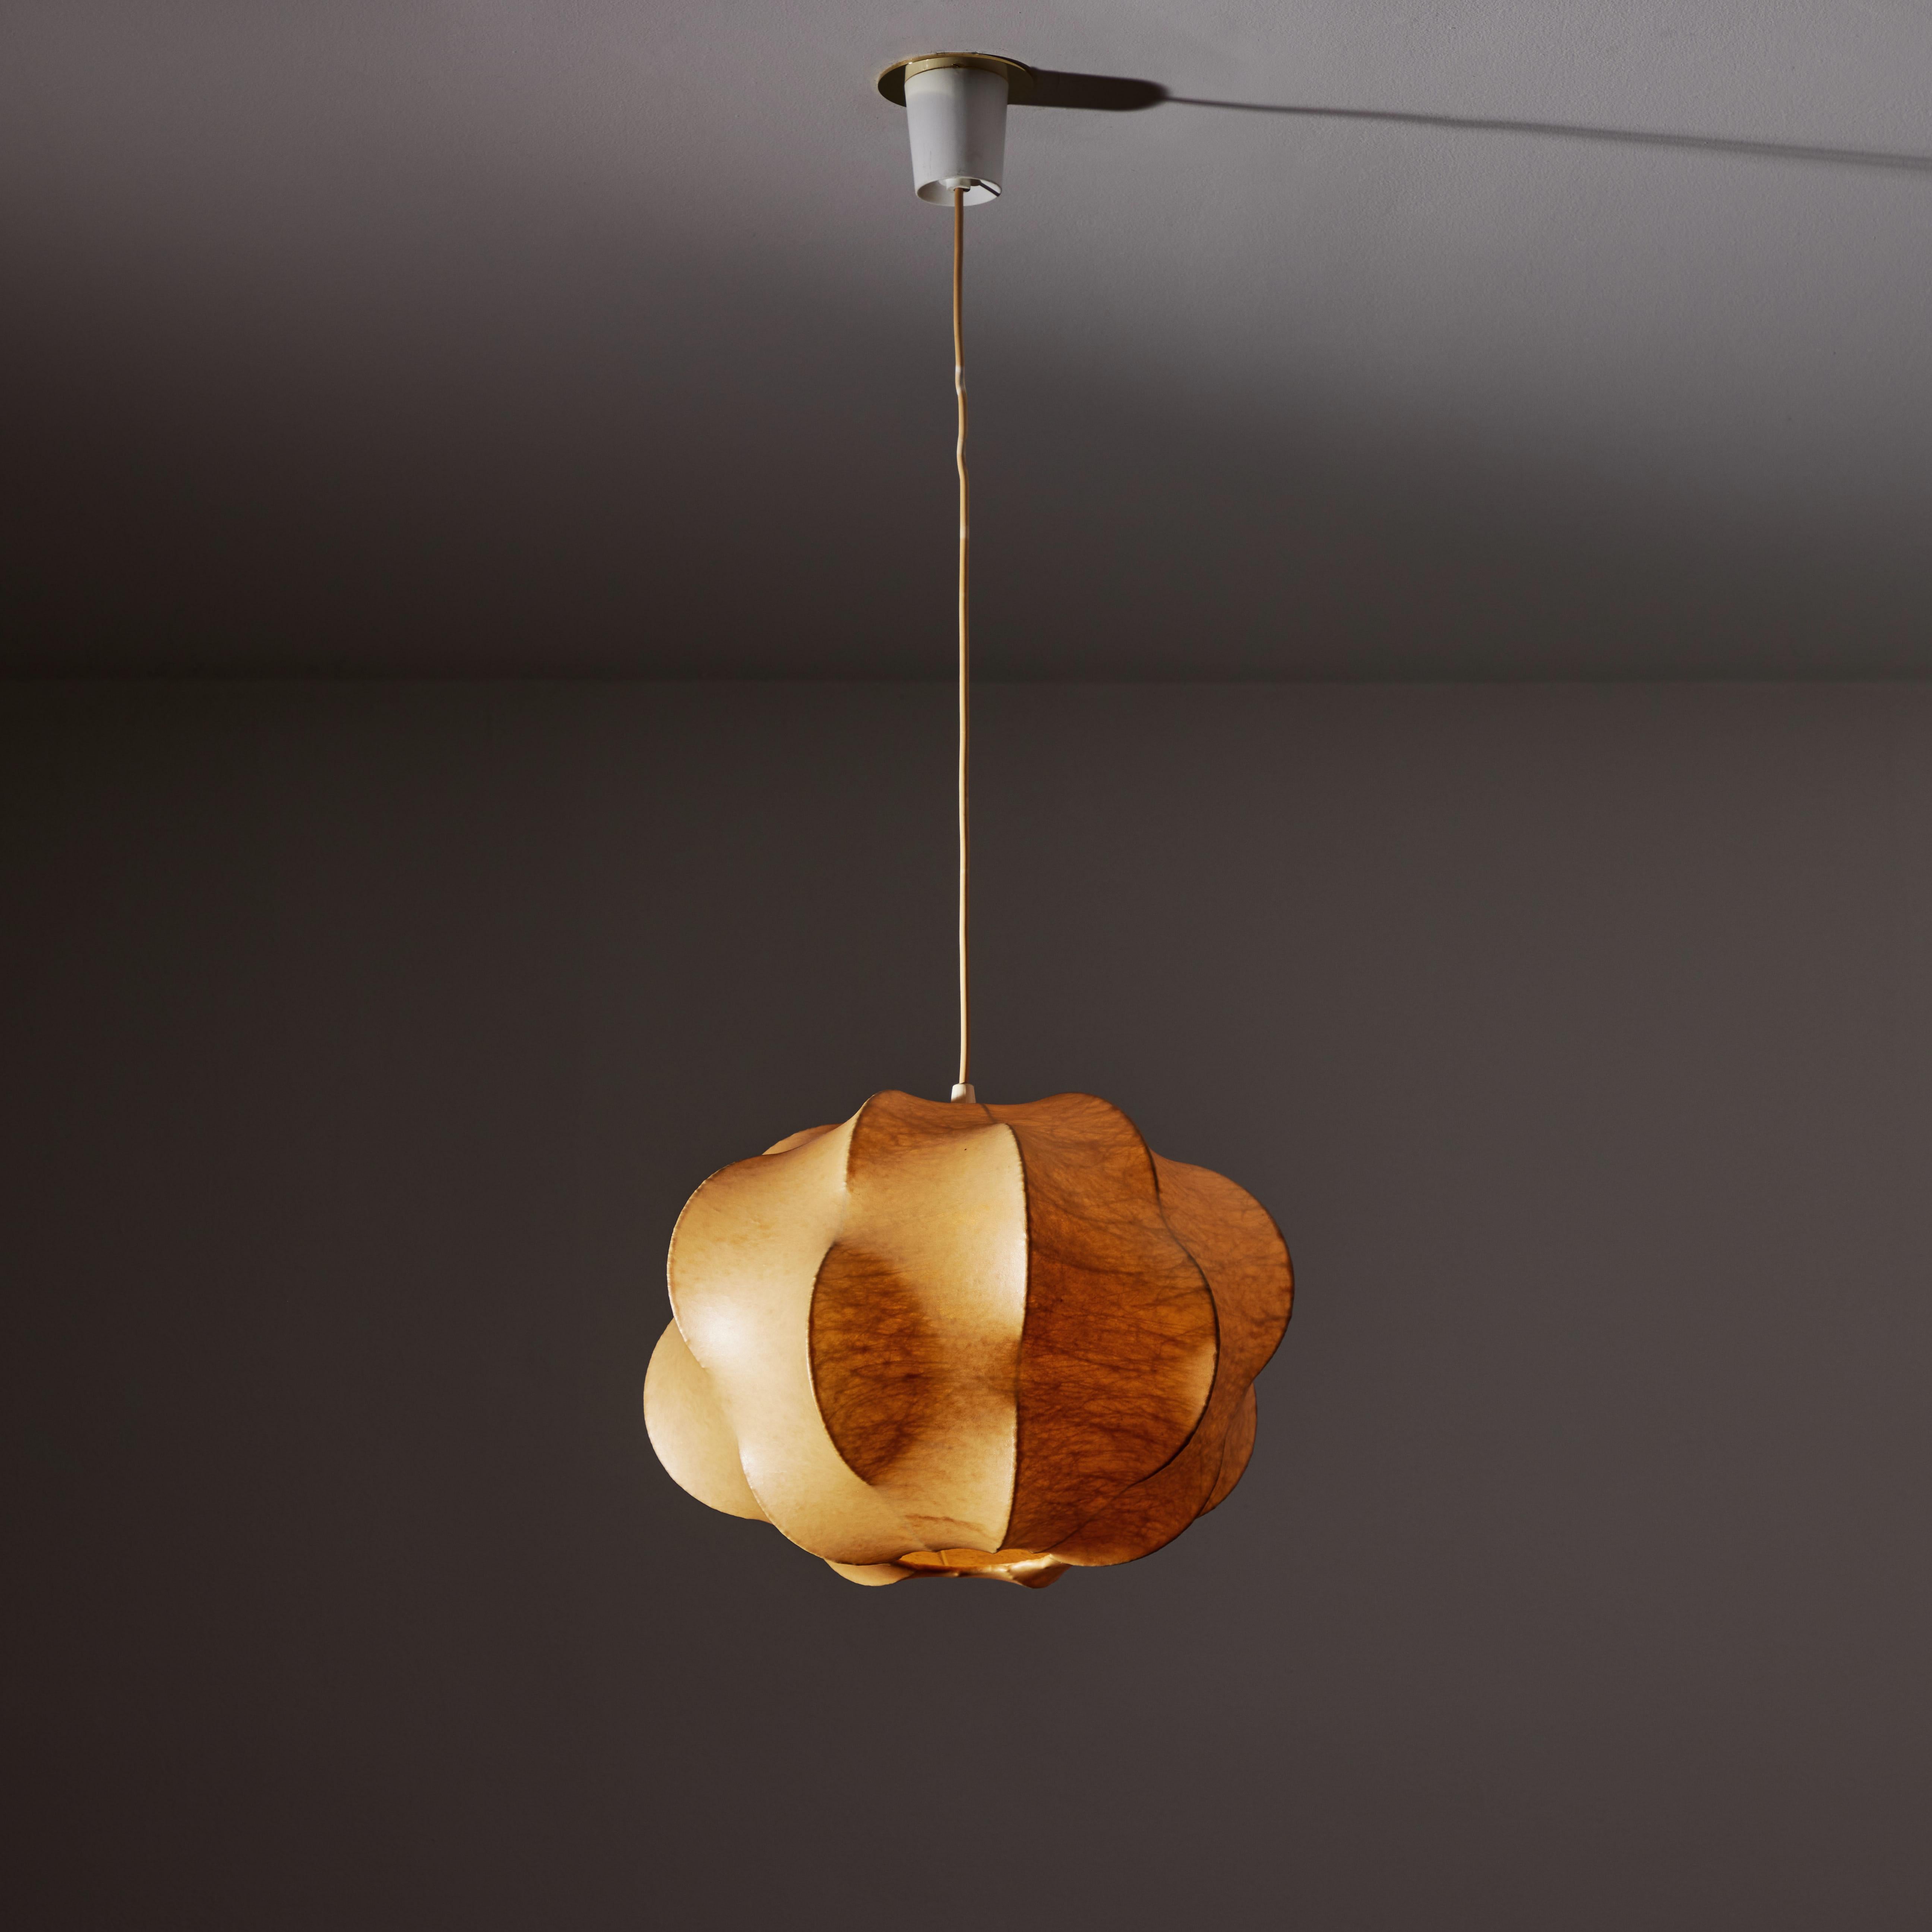 Steel Nuvola Suspension Light by Tobia Scarpa for Flos